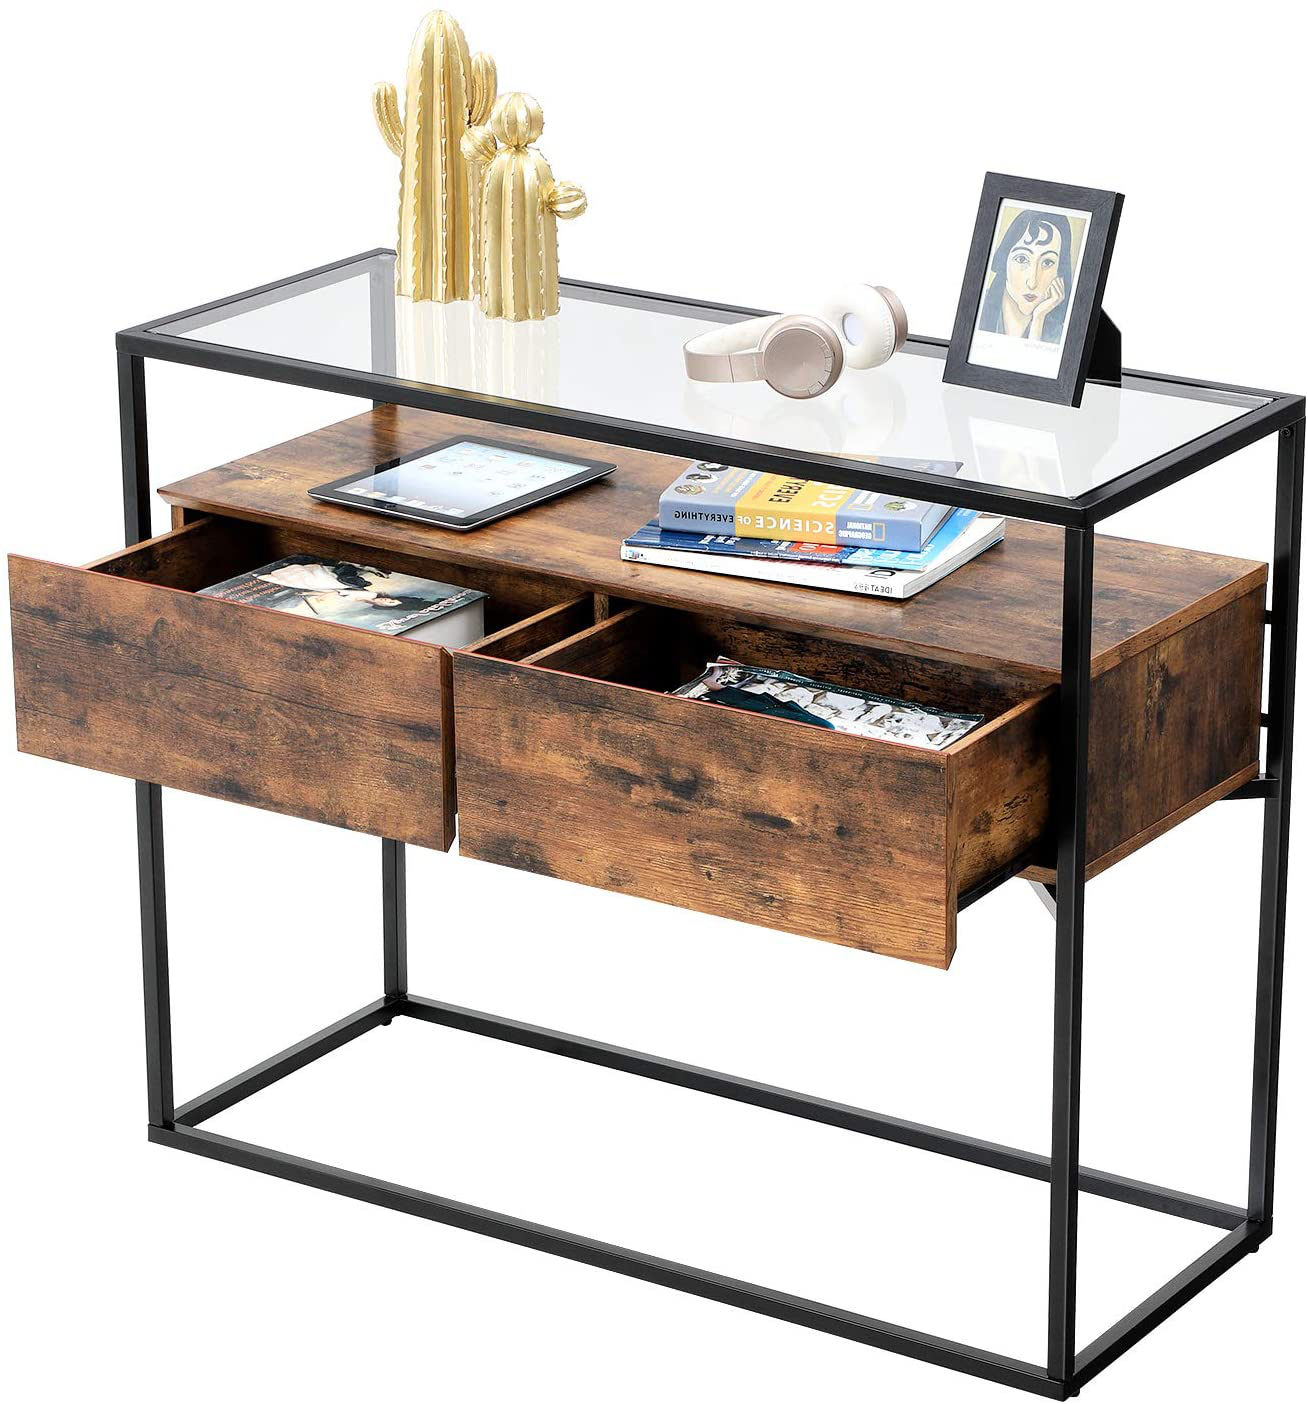 Rena Console Glass Table with 2 Drawers and Rustic Shelf